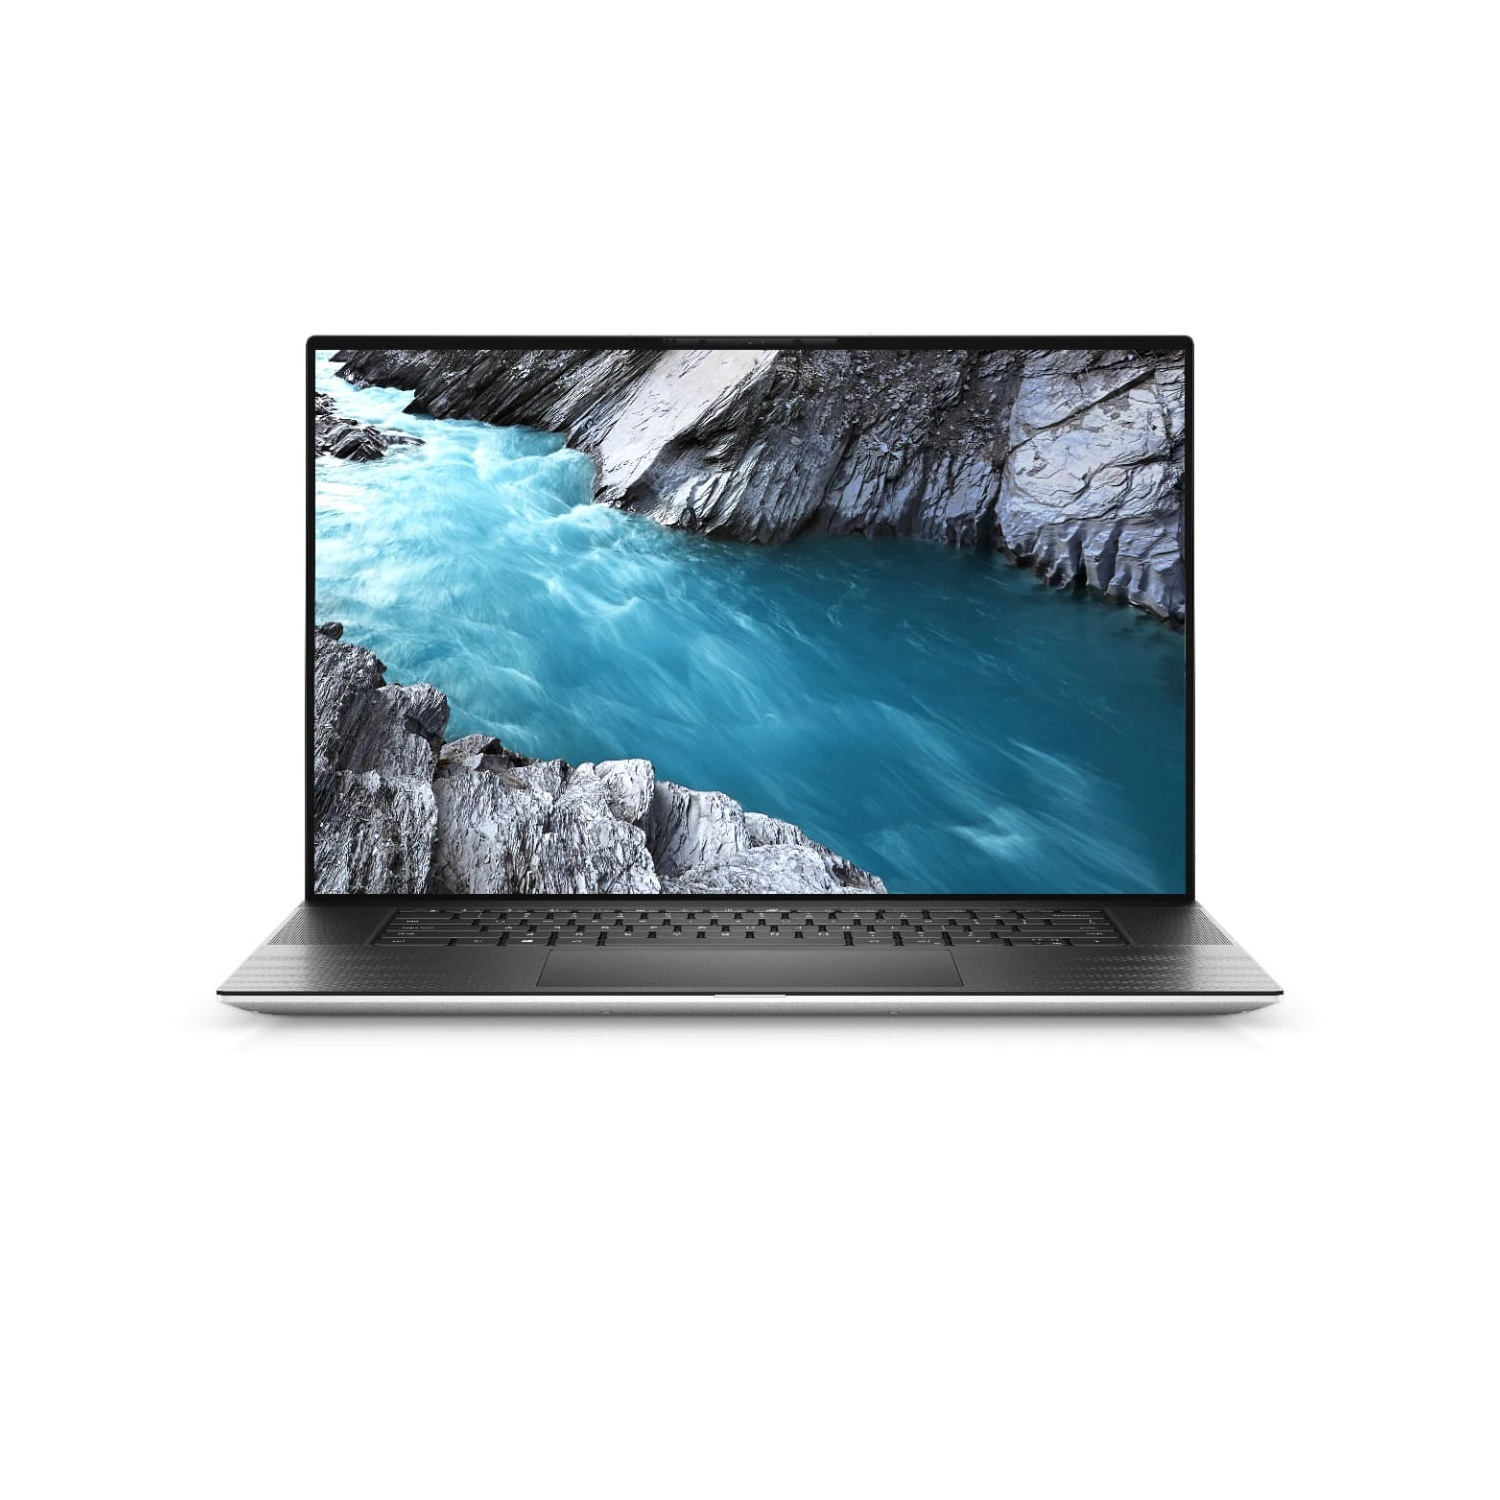 Refurbished (Excellent) - Dell XPS 17 9700 Laptop (2020) | 17" FHD+ | Core i9 - 2TB SSD - 64GB RAM - RTX 2060 | 8 Cores @ 5.3 GHz - 10th Gen CPU Certified Refurbished